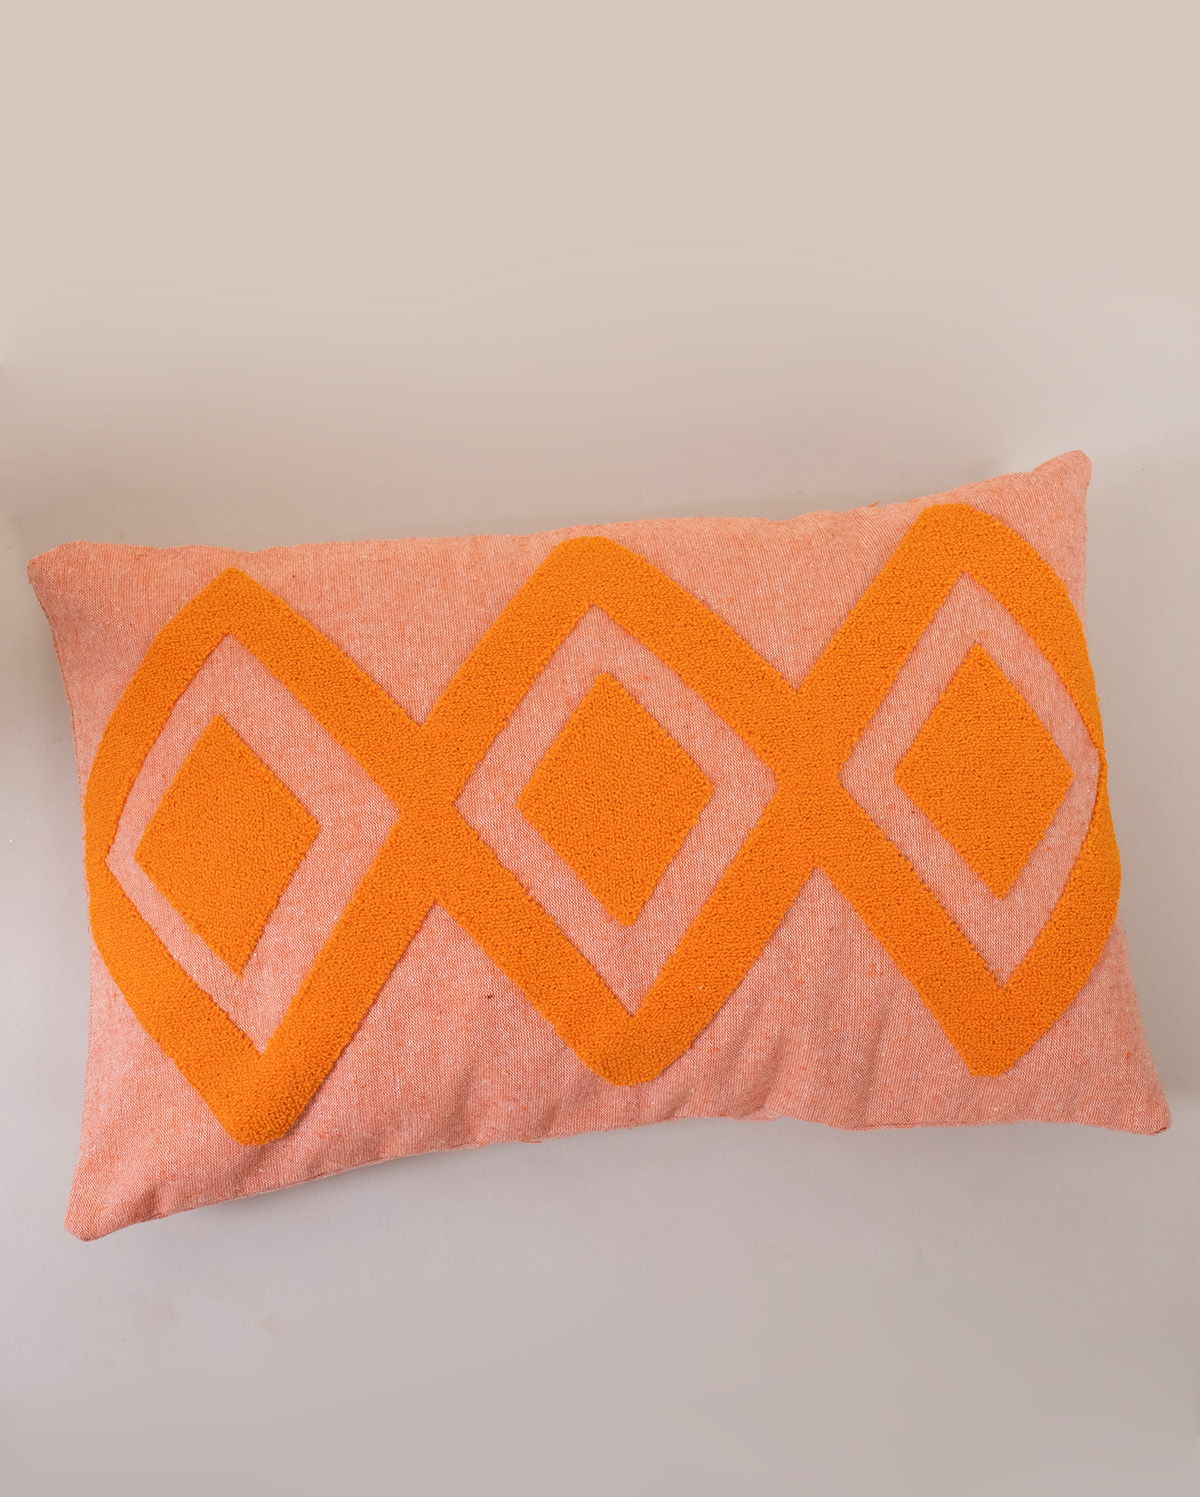 Embroidered Cushion Cover - Apricot & Beige